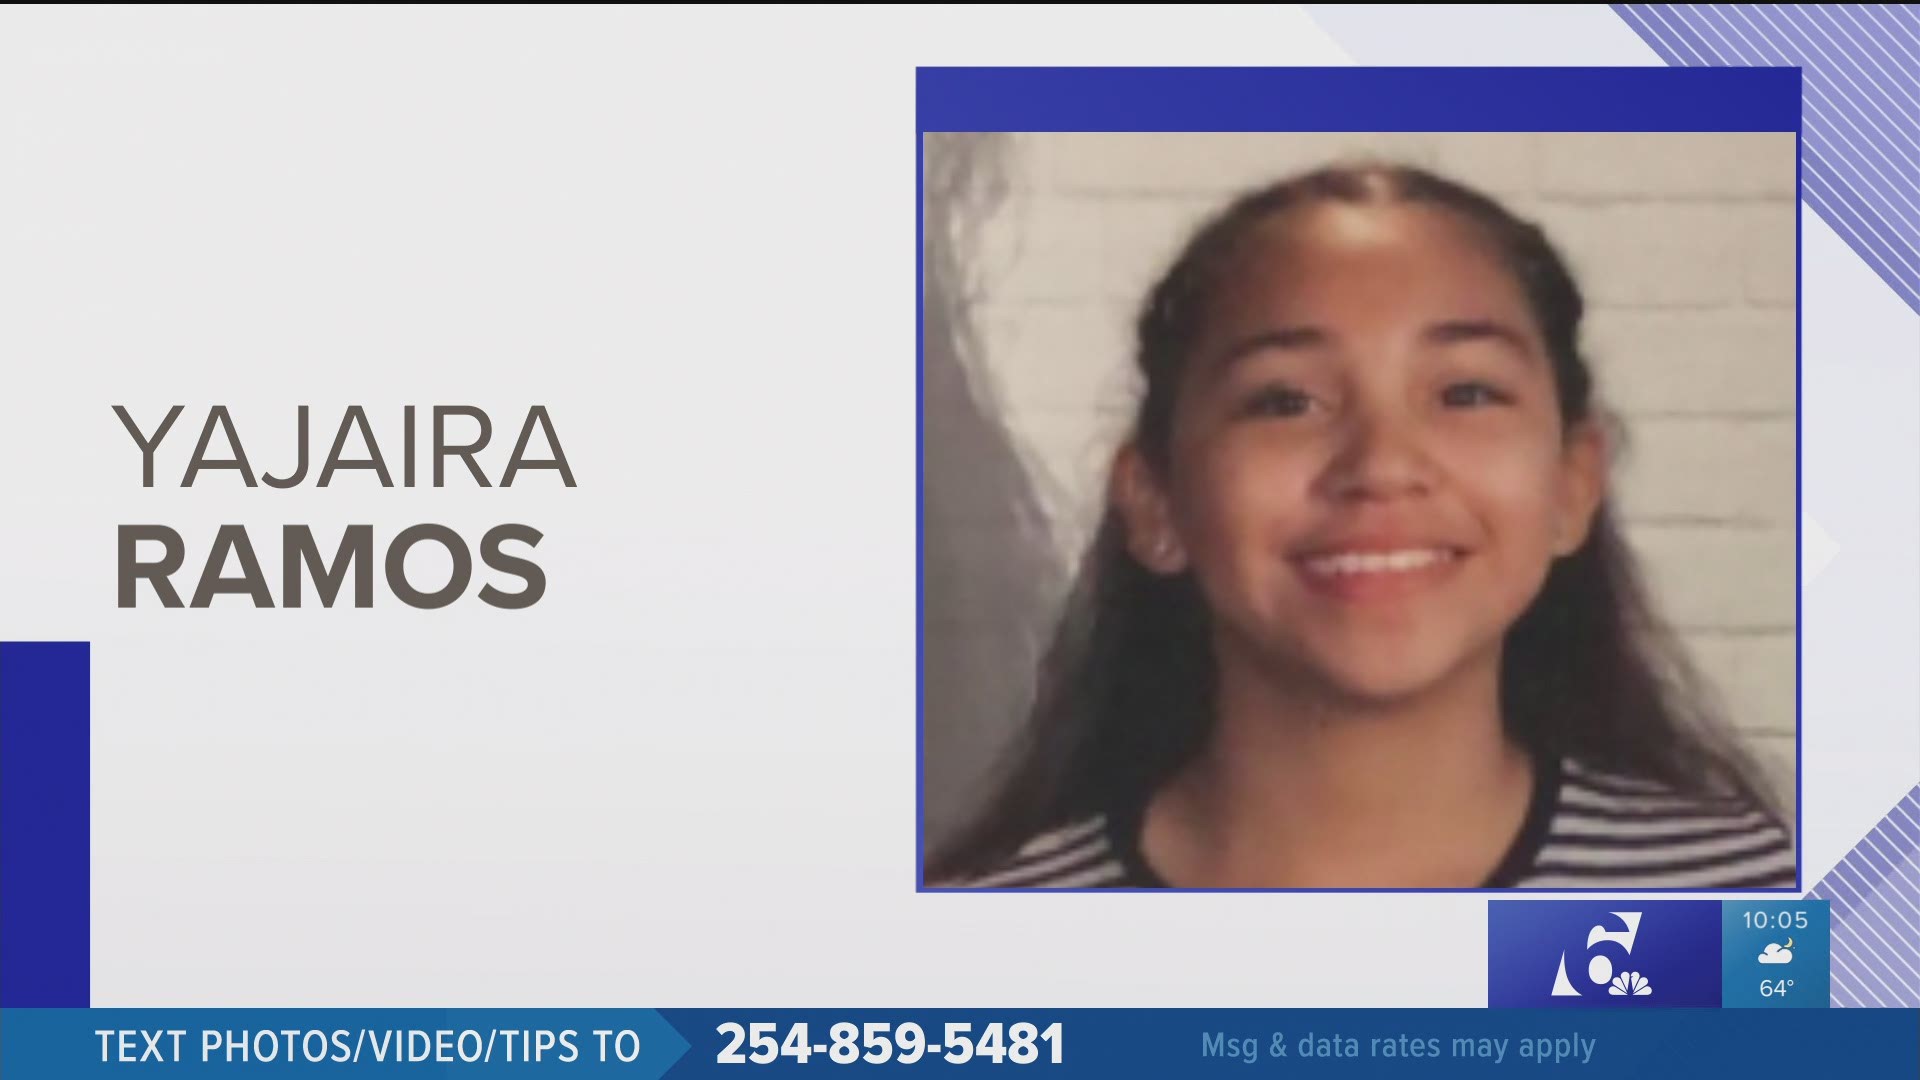 Police say Yajaira Ramos was last seen on April 20 in the 1500 block of E. Barton Ave.